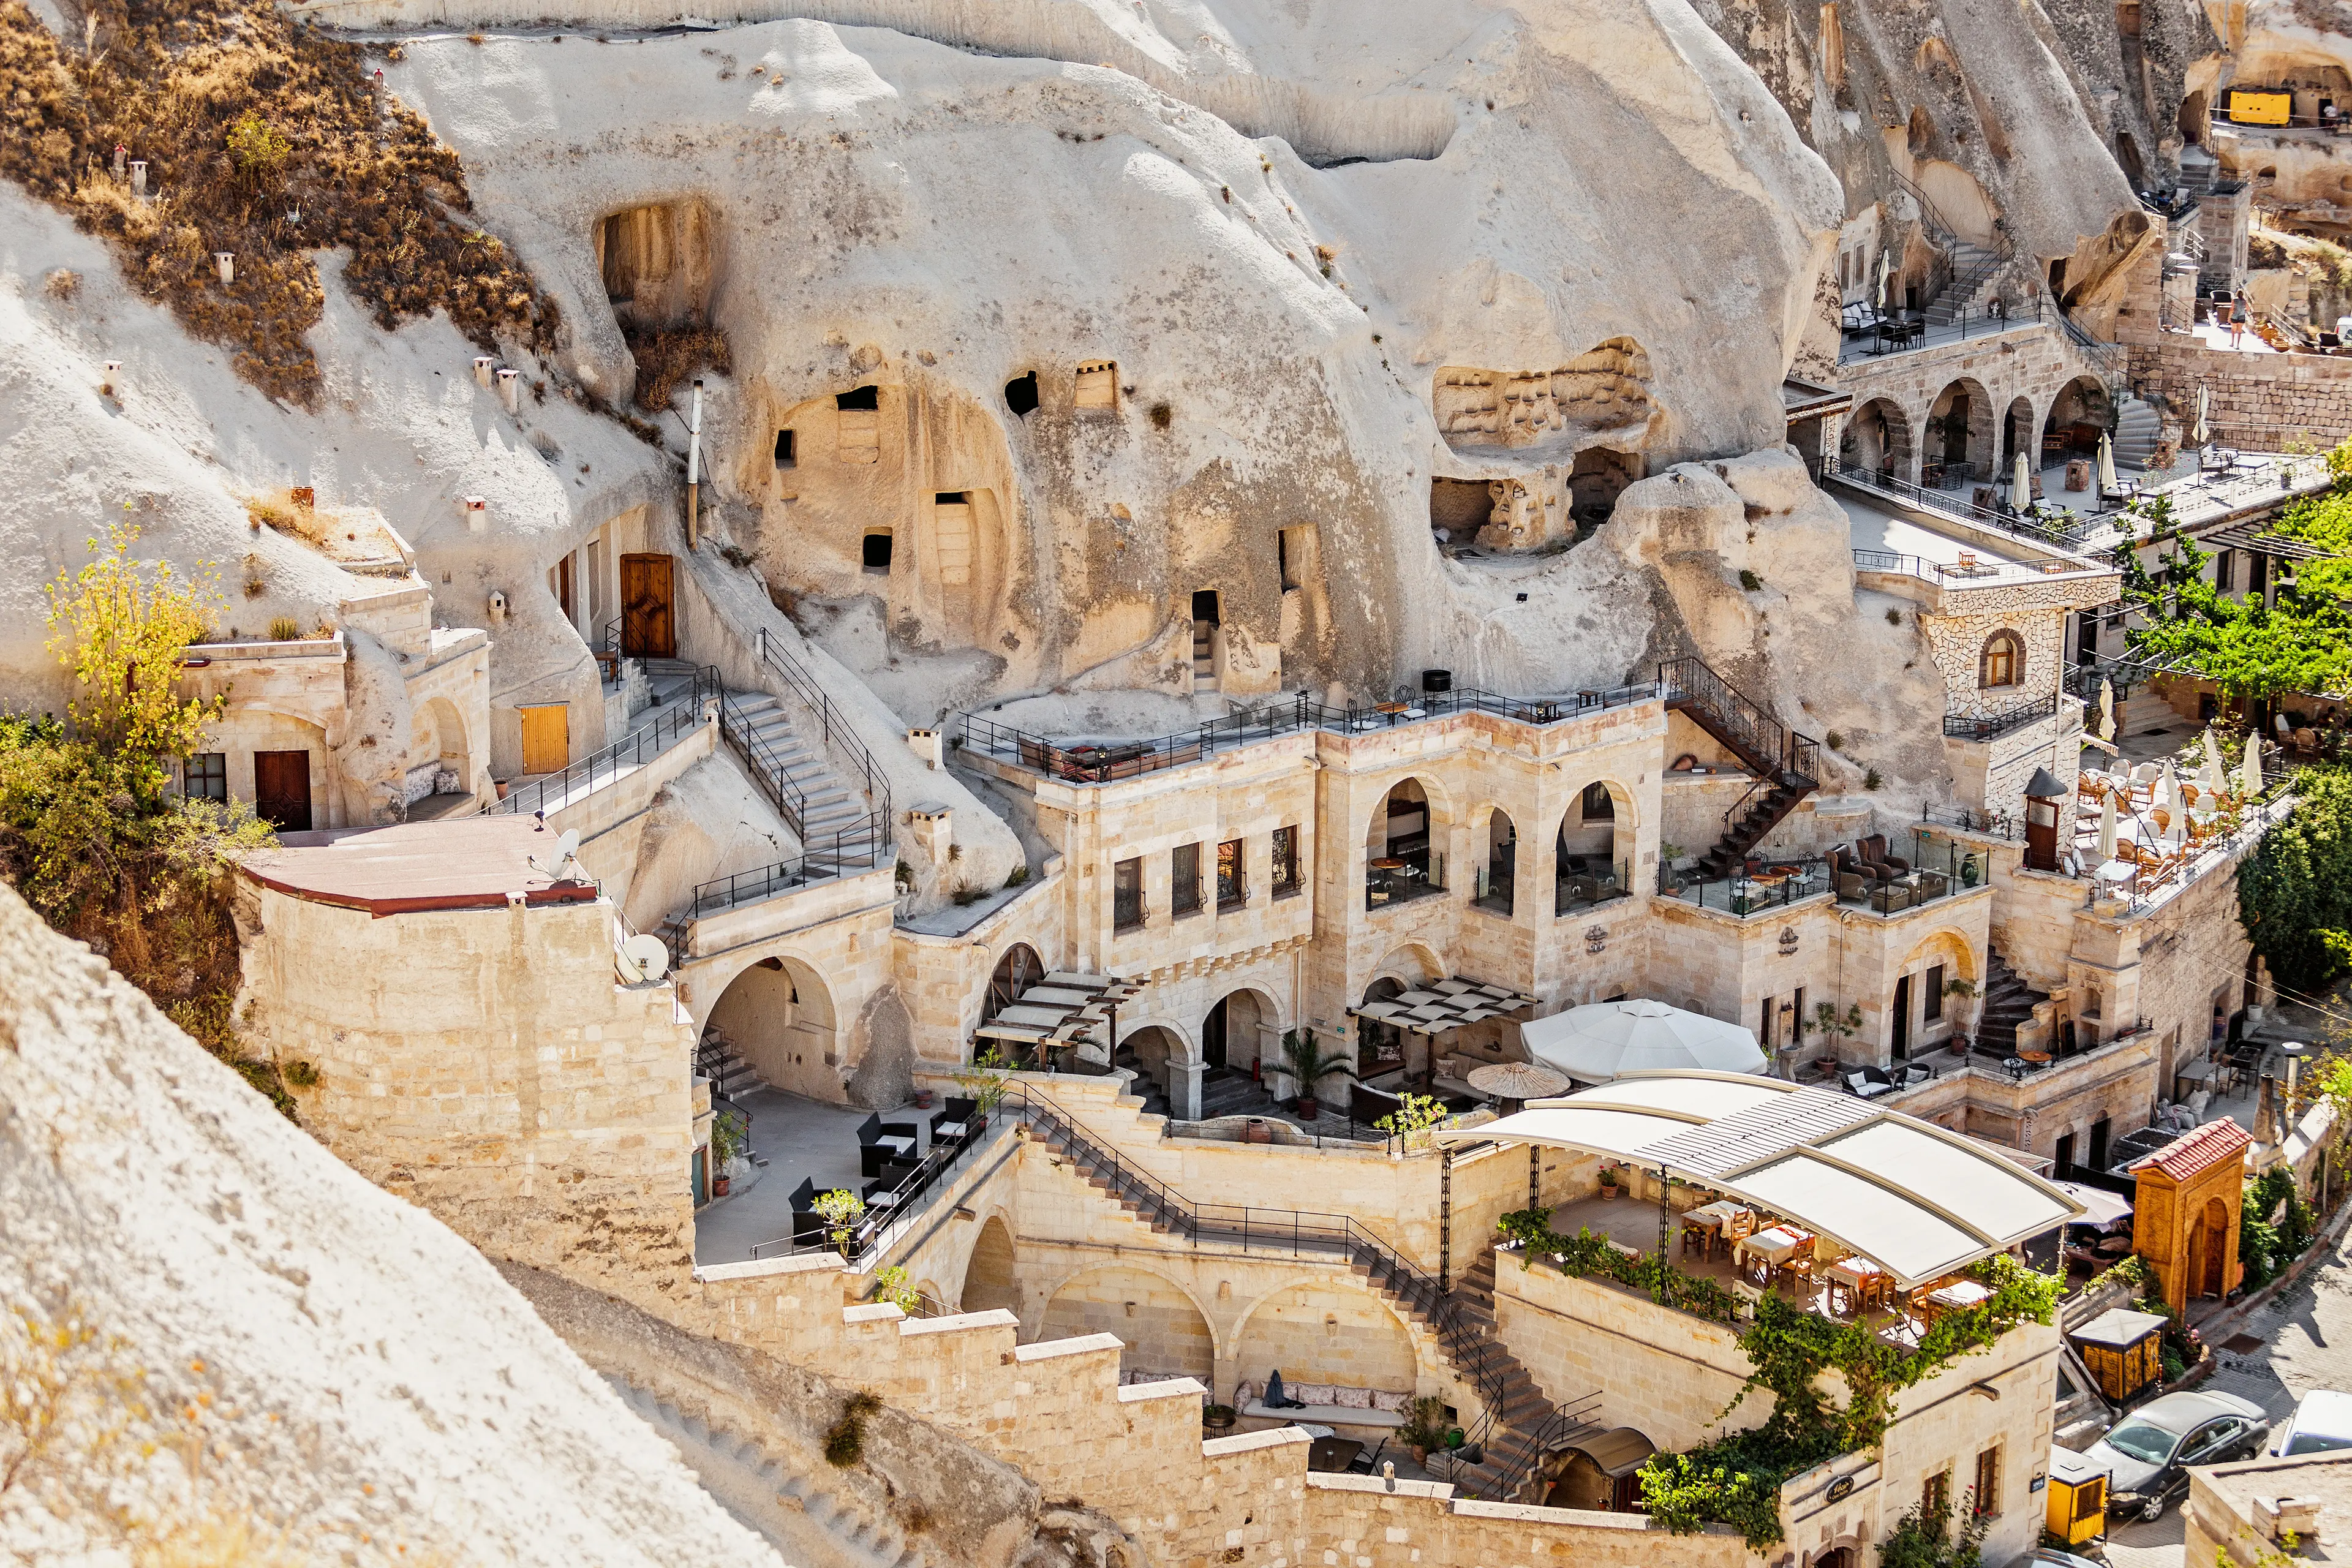 Hotels carved on the stone formations